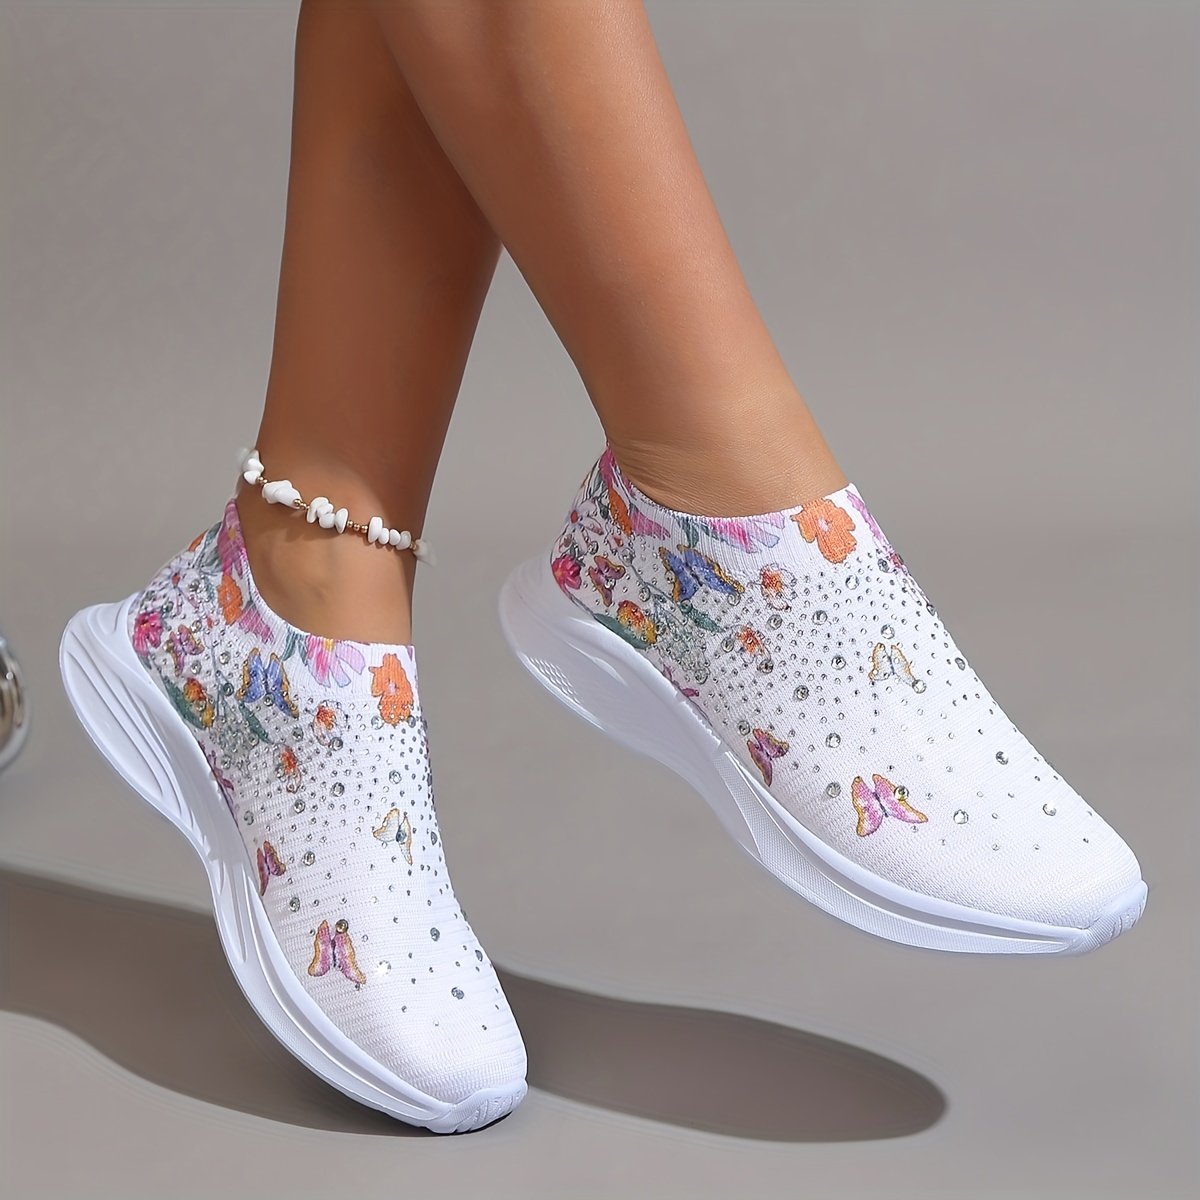 Women's Fashion Breathable Sneakers Ladies Embroidered Lace Up Crystal  Bling Slip On Dressy Tennis Shoes Comfort Outdoor Travel Work Platform  Loafers